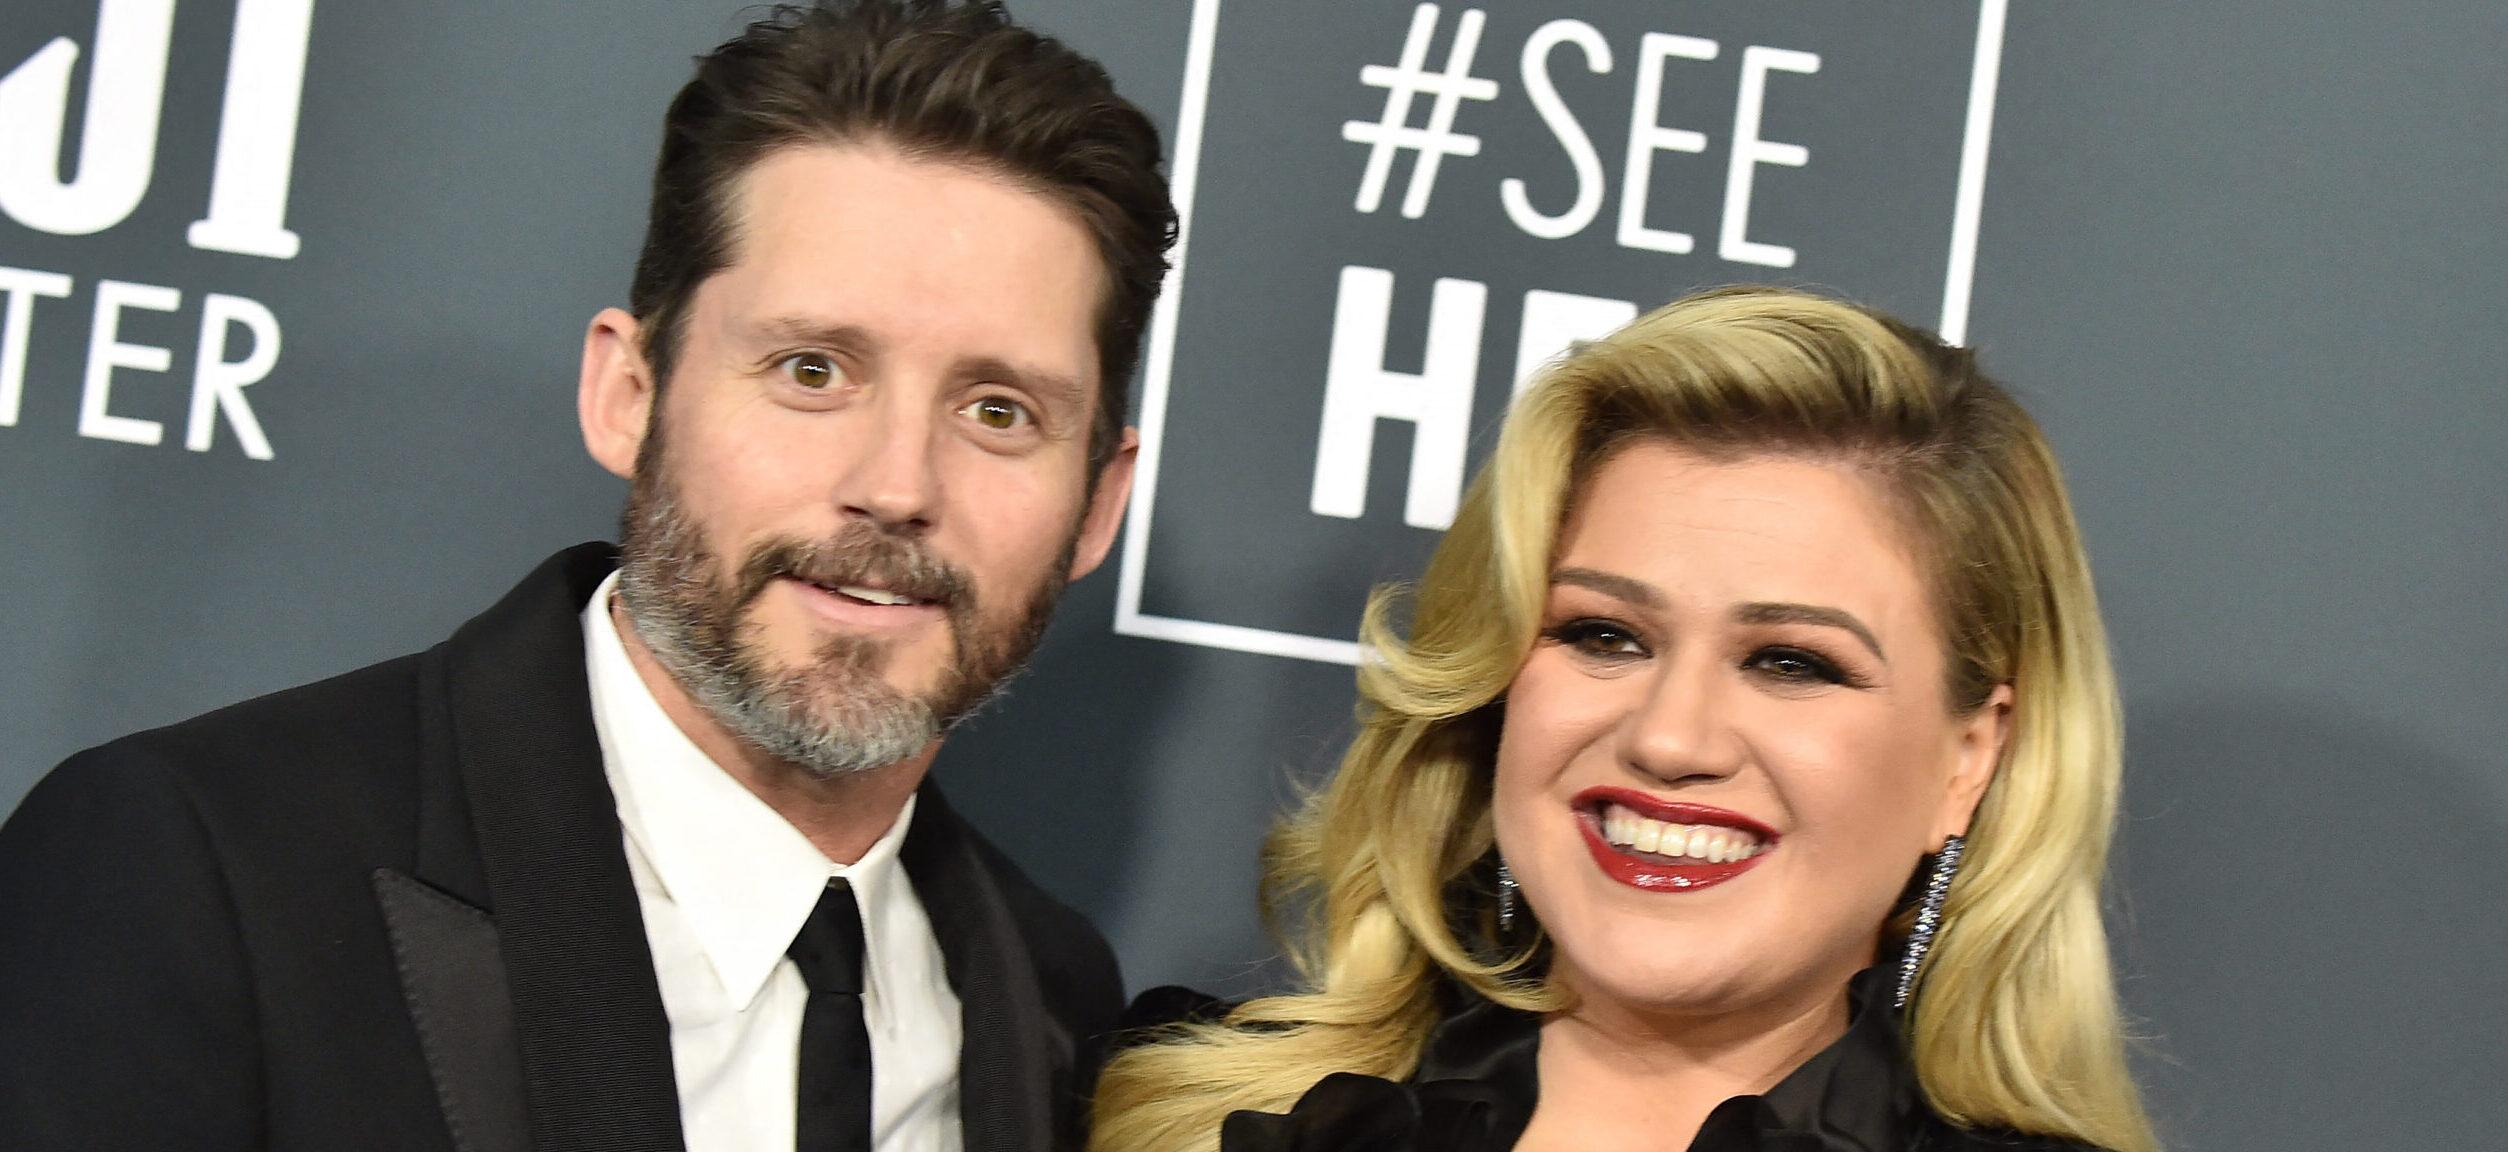 Kelly Clarkson Had Deep ‘Chemistry’ With Ex Brandon Blackstock But In Unhealthy Environment